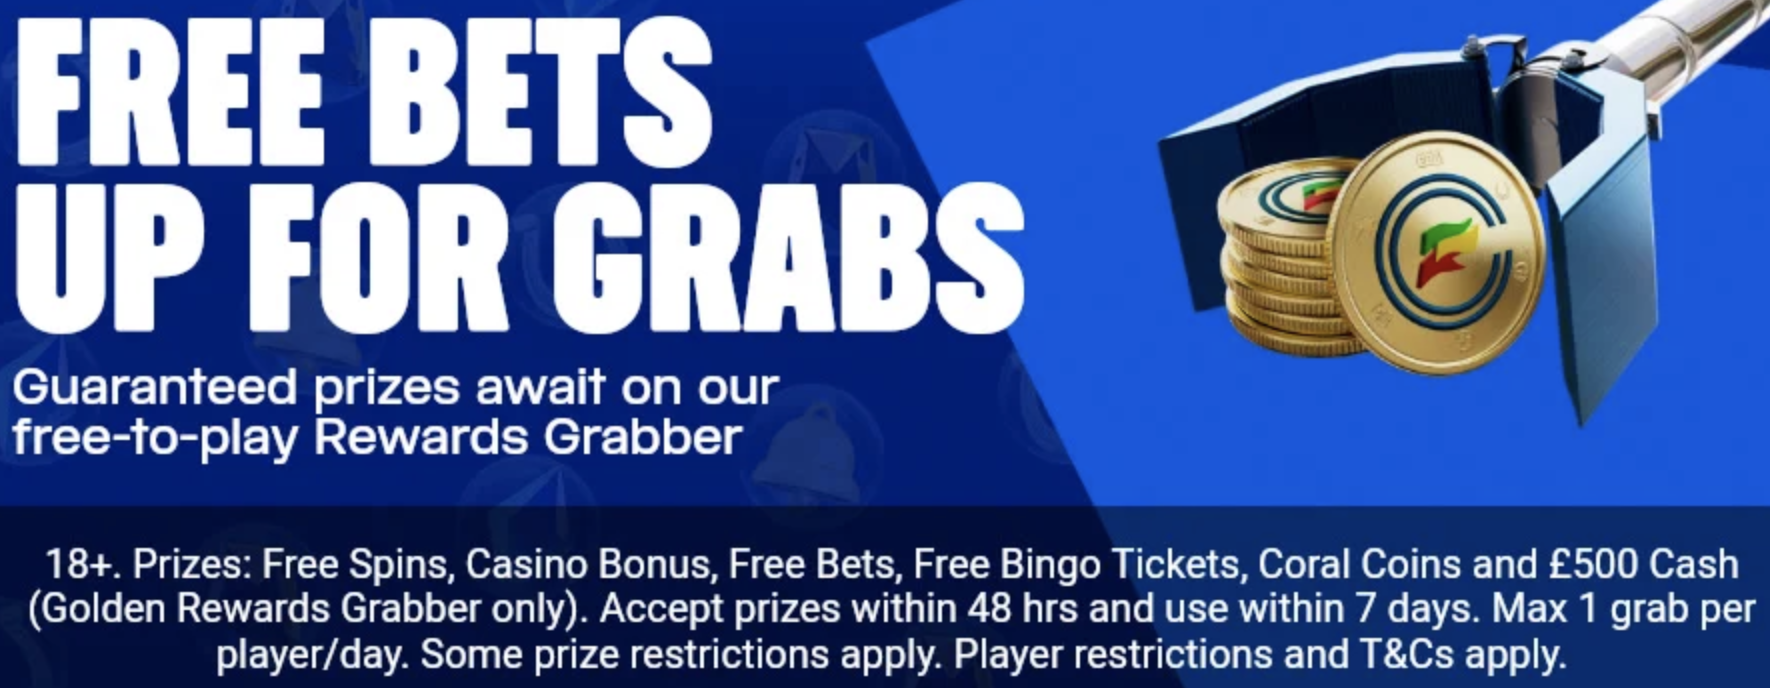 The Rewards Grabber is on of Coral's existing customer offers.